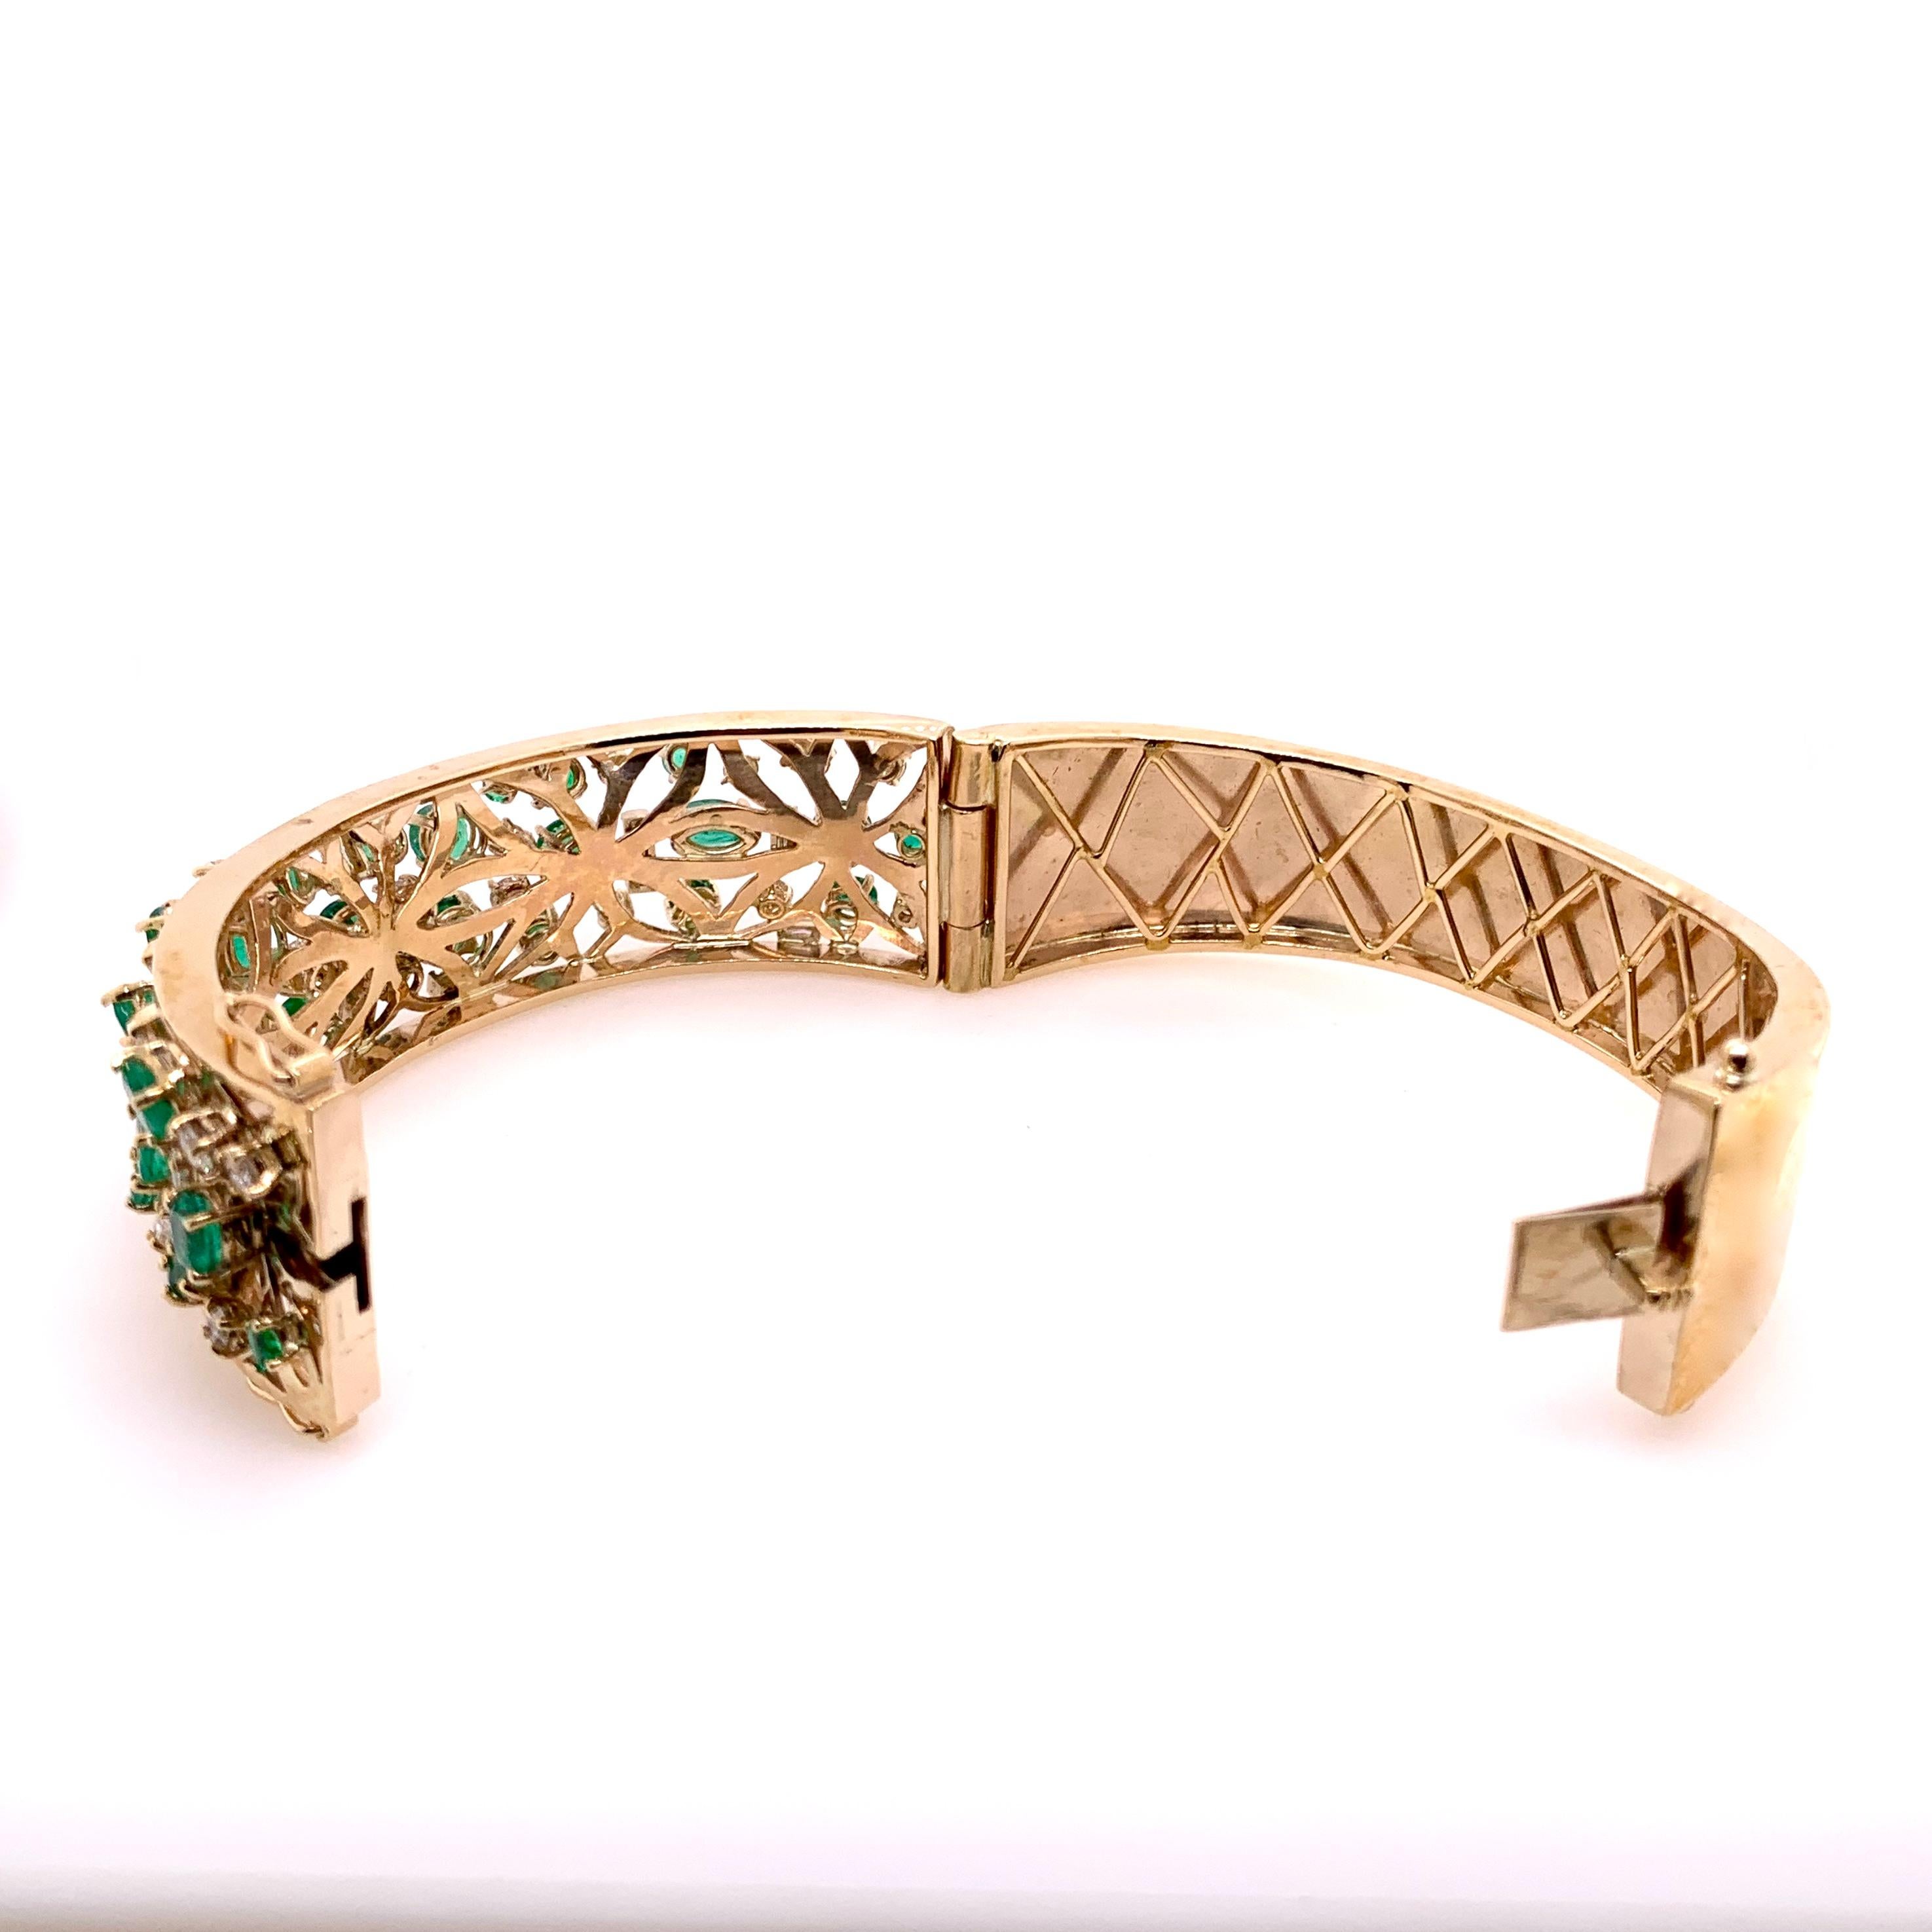 Contemporary Emerald and Diamond Cuff Bangle Bracelet in 14k Yellow Gold For Sale